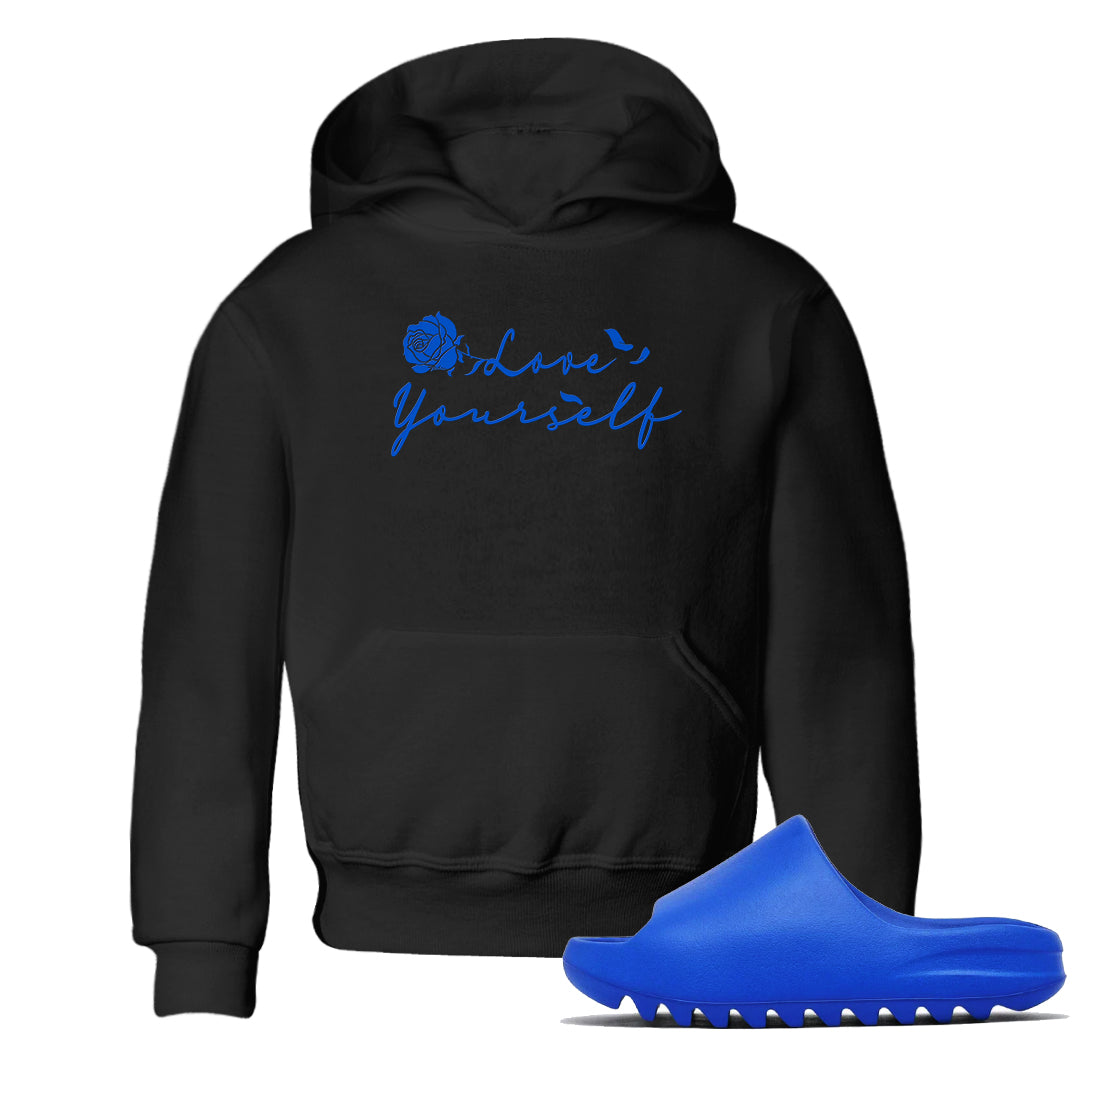 Yeezy Slide Azure shirts to match jordans Love Yourself sneaker match tees Yeezy Slide Azure SNRT Sneaker Tees streetwear brand Baby and Youth Black 1 cotton tee